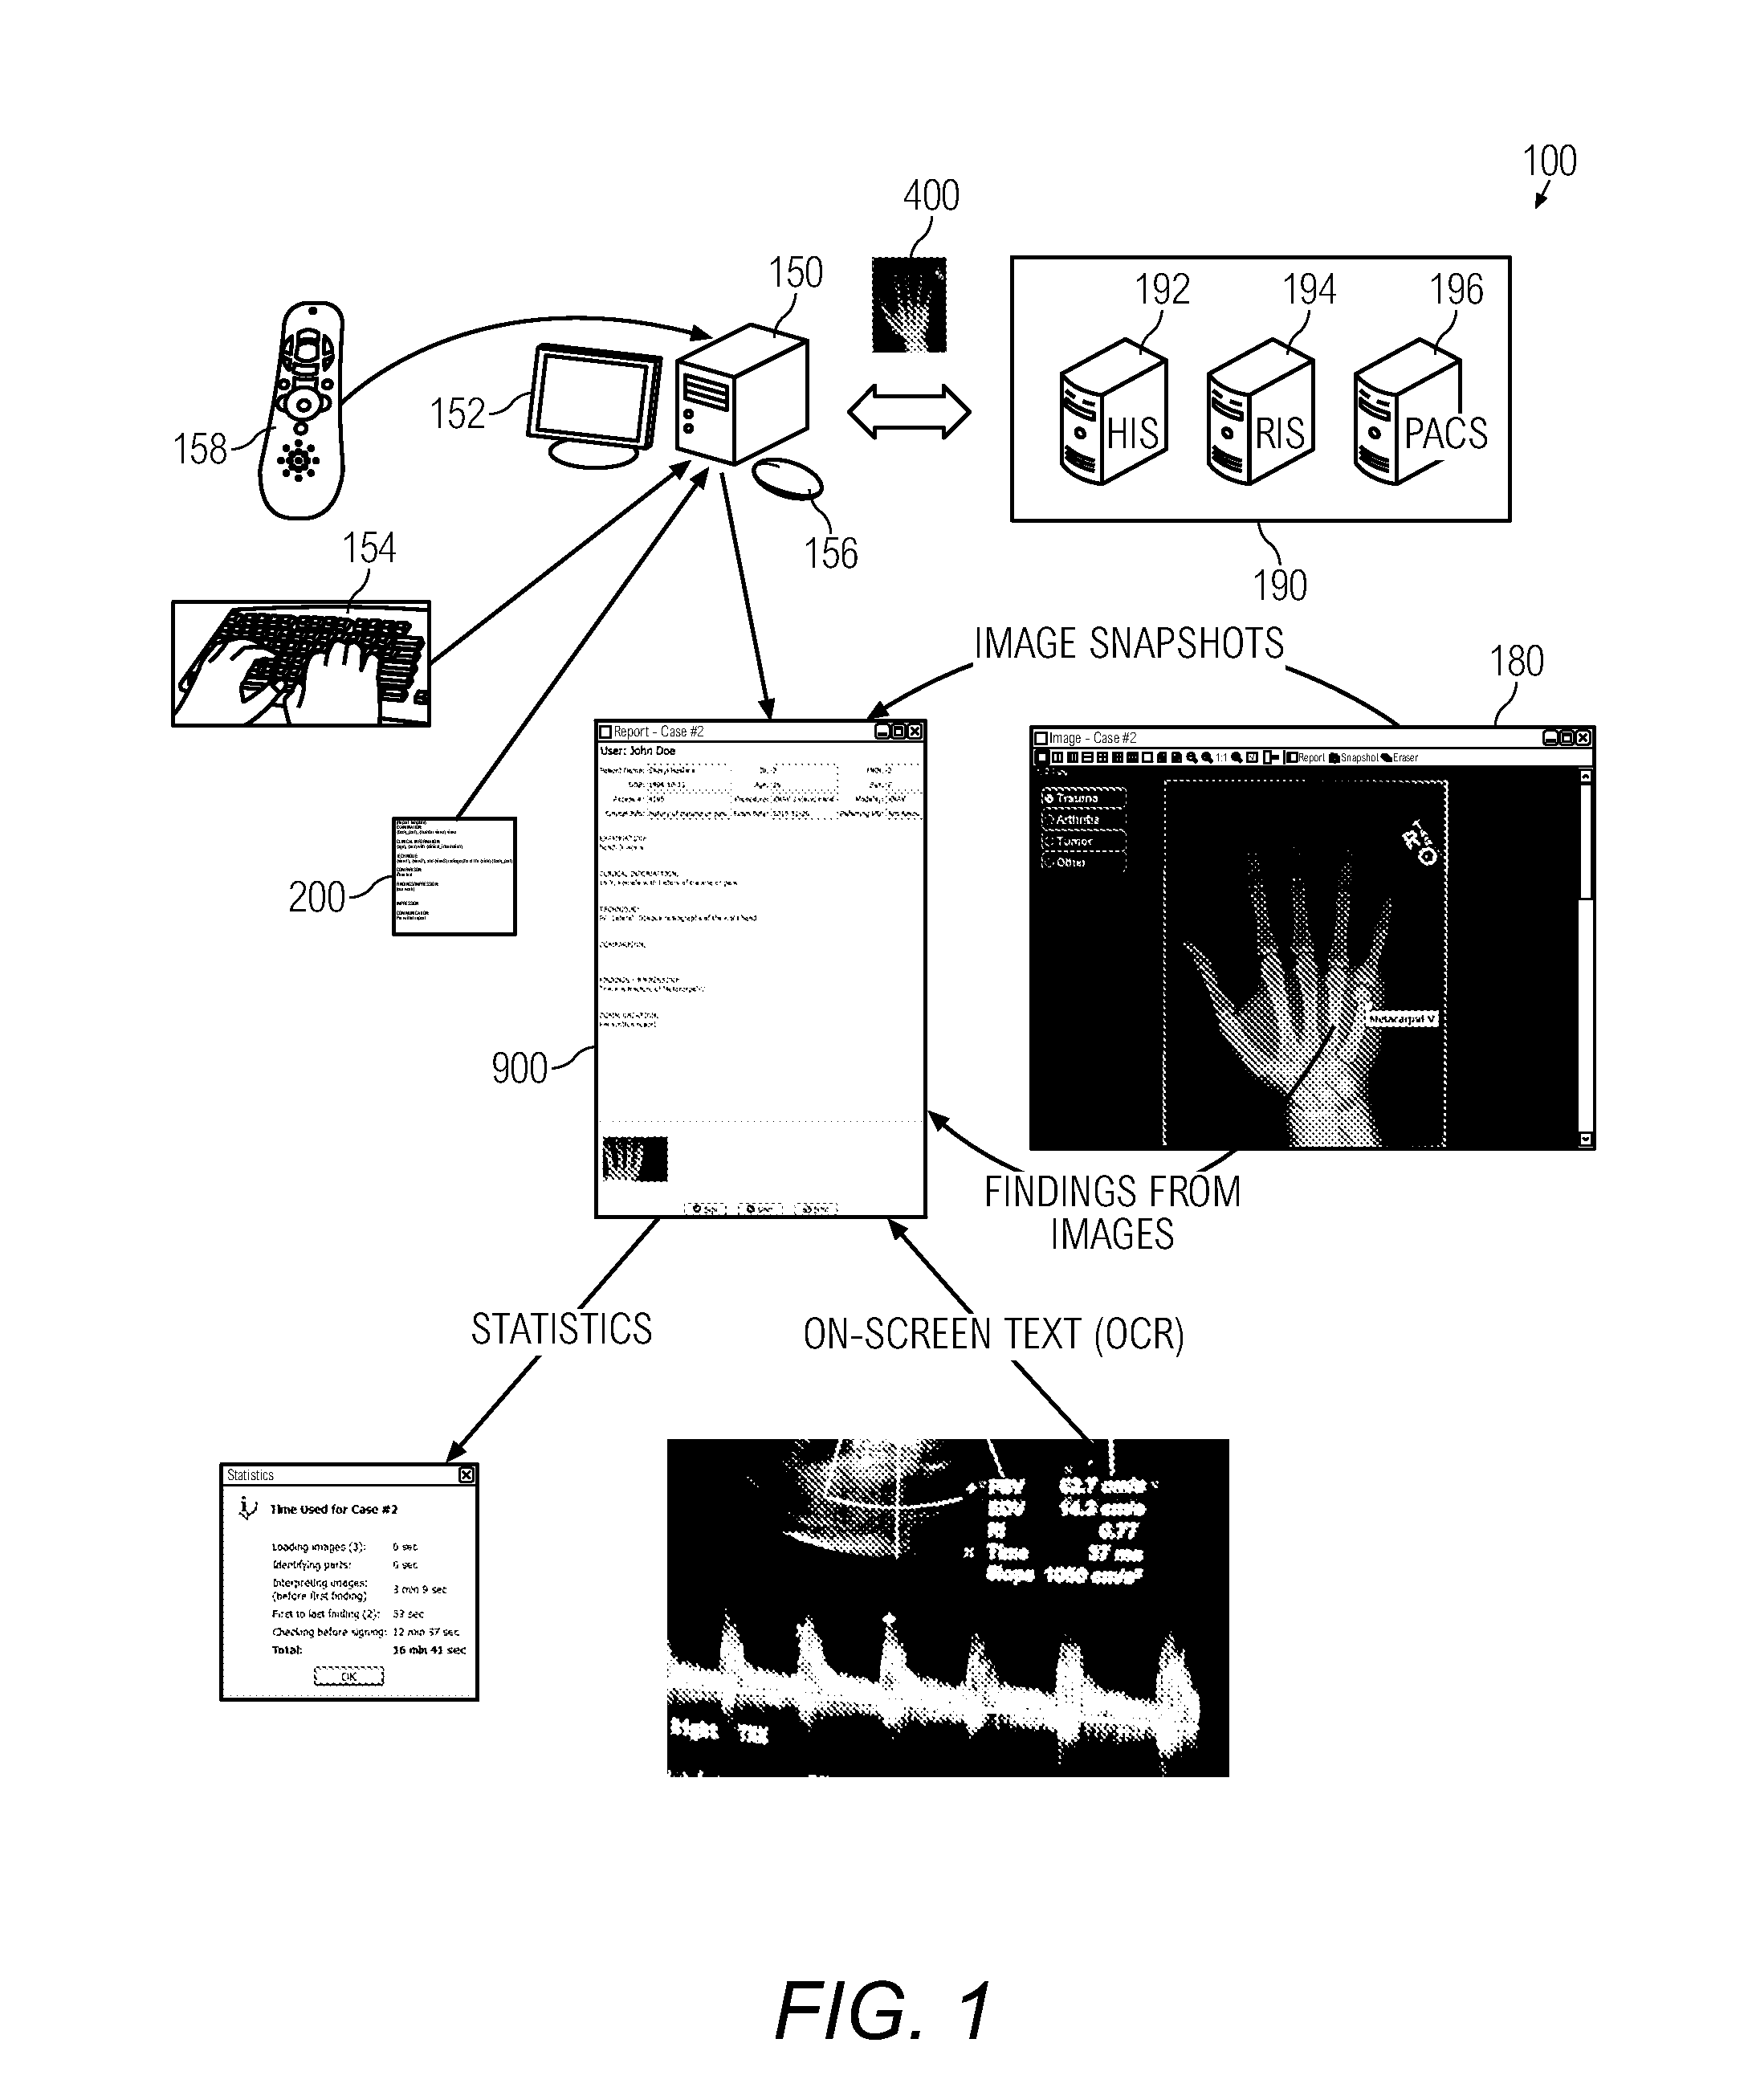 Method for creating a report from radiological images using electronic report templates